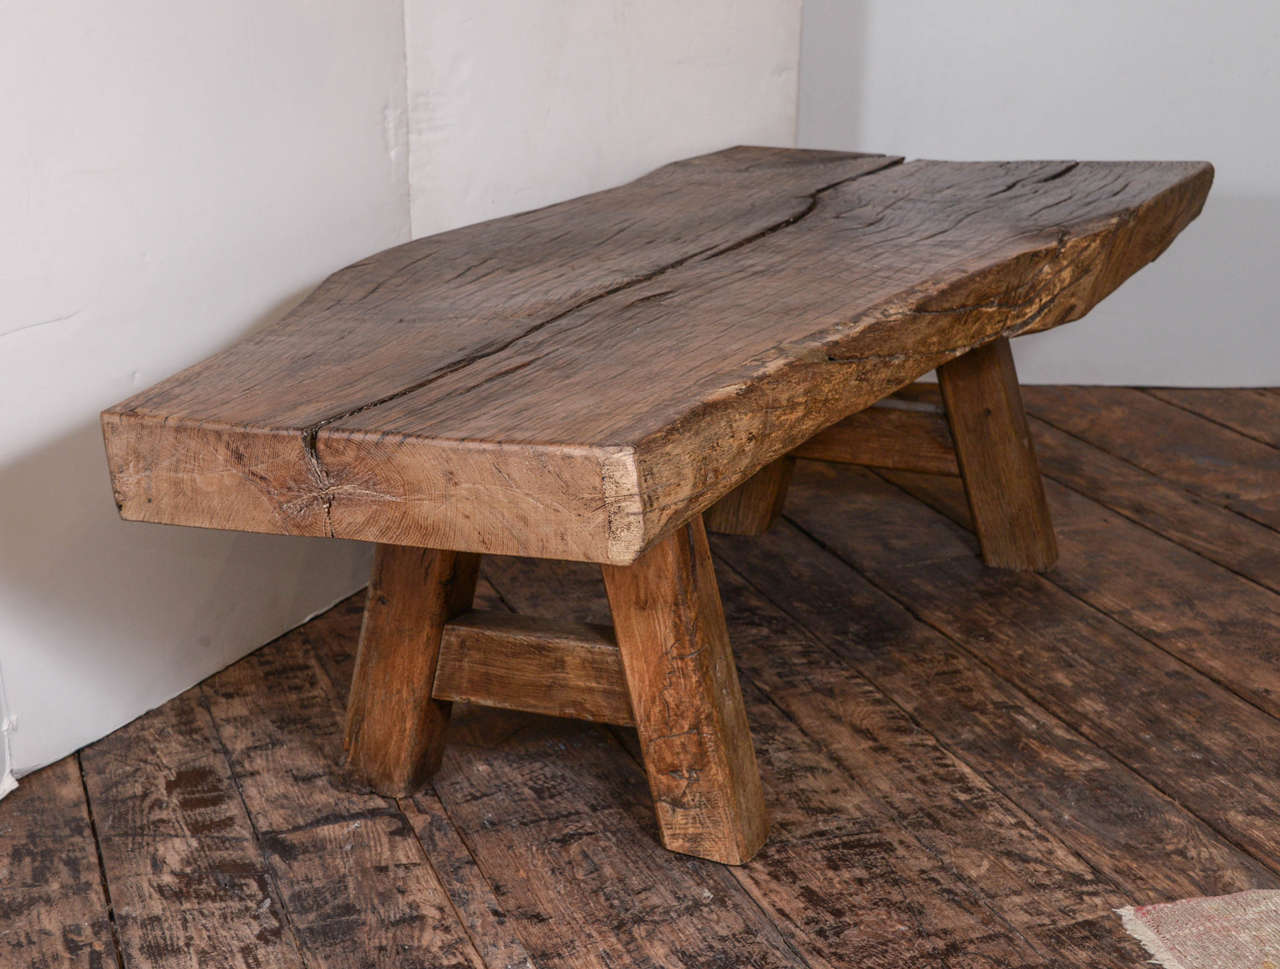 French oak coffee table from the 19th century.